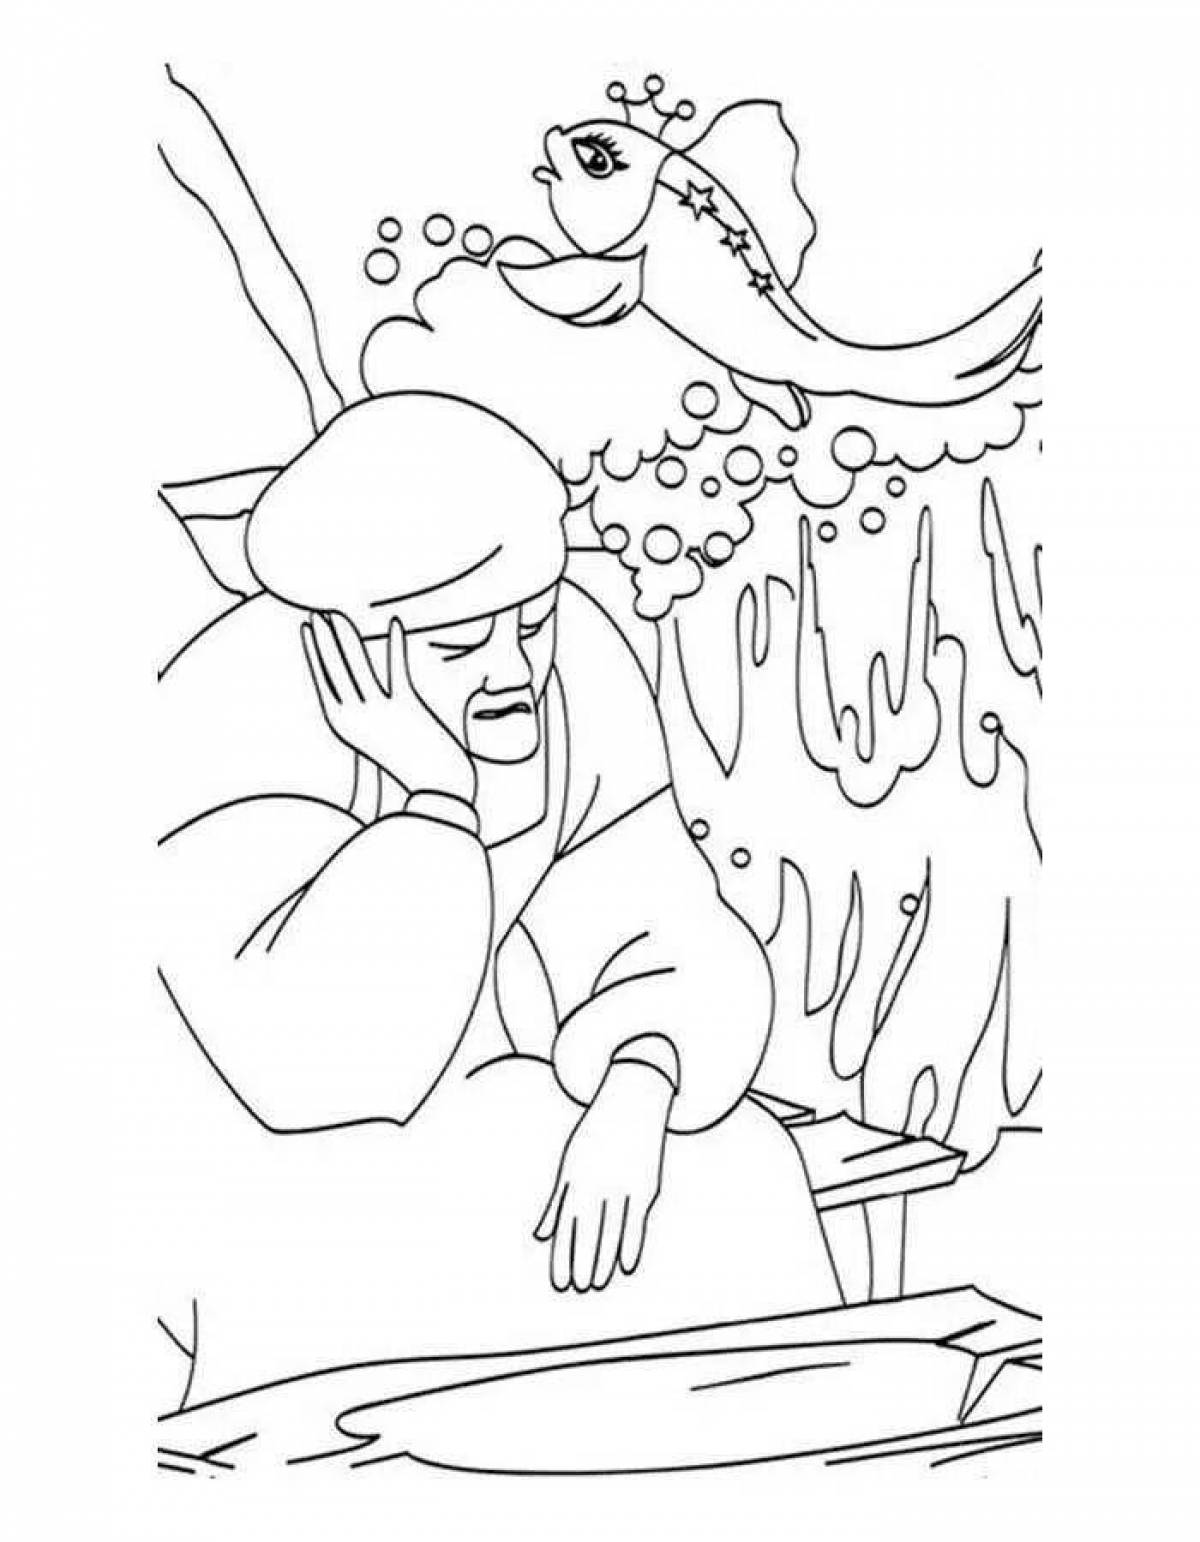 Radiant golden fish story coloring page